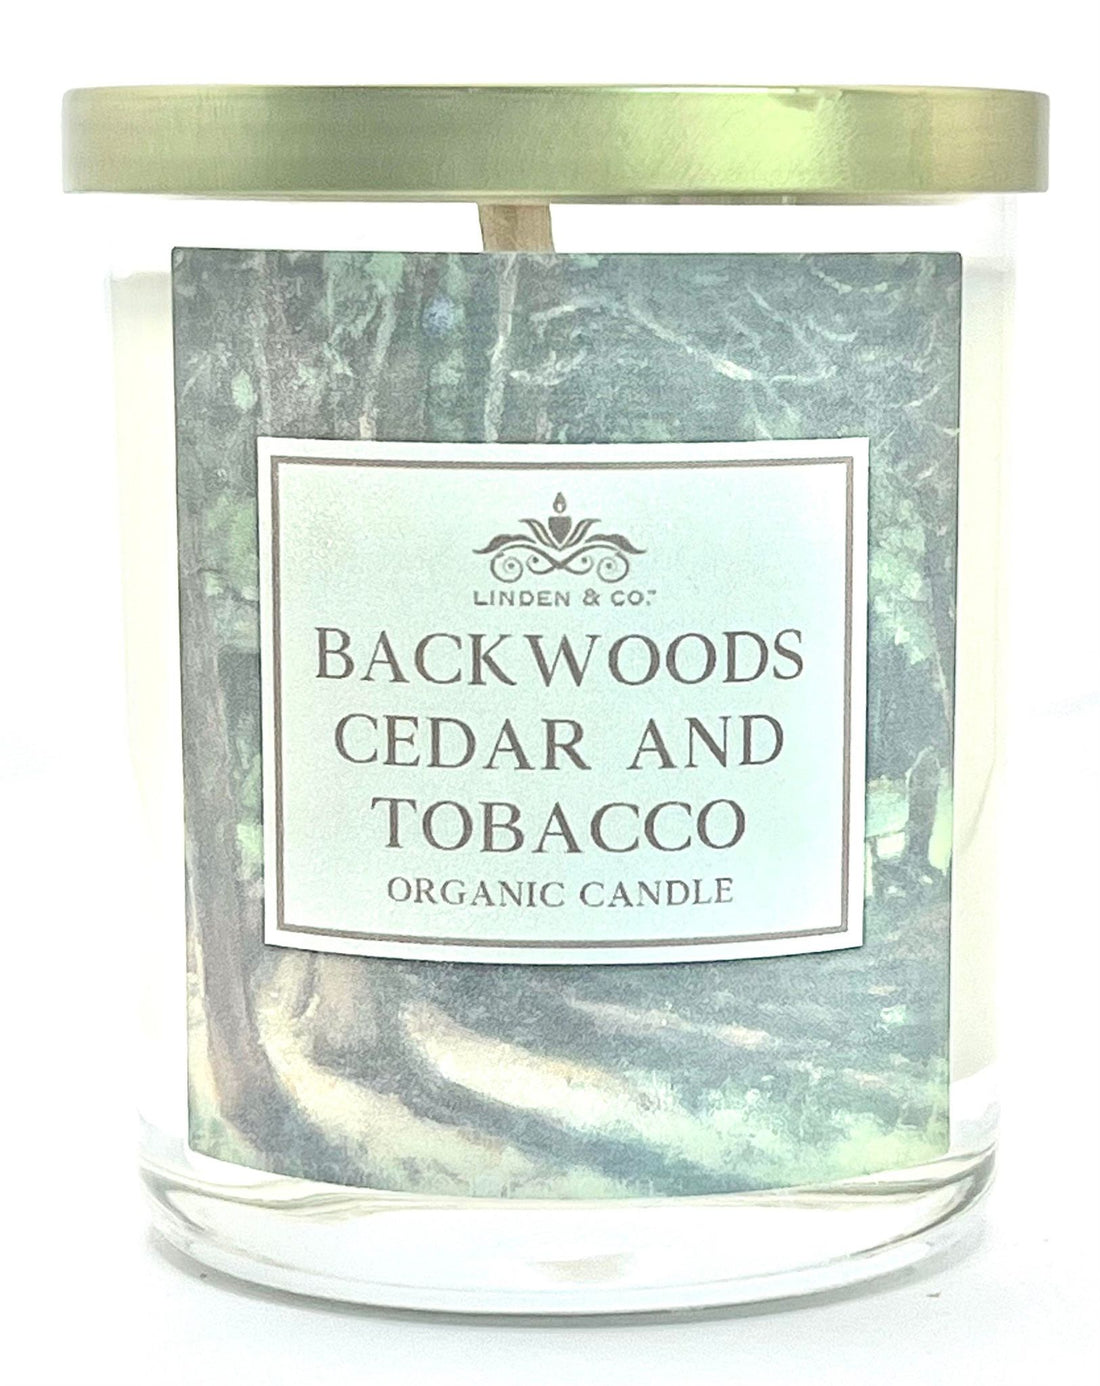 Backwoods Cedar and Tobacco Candle